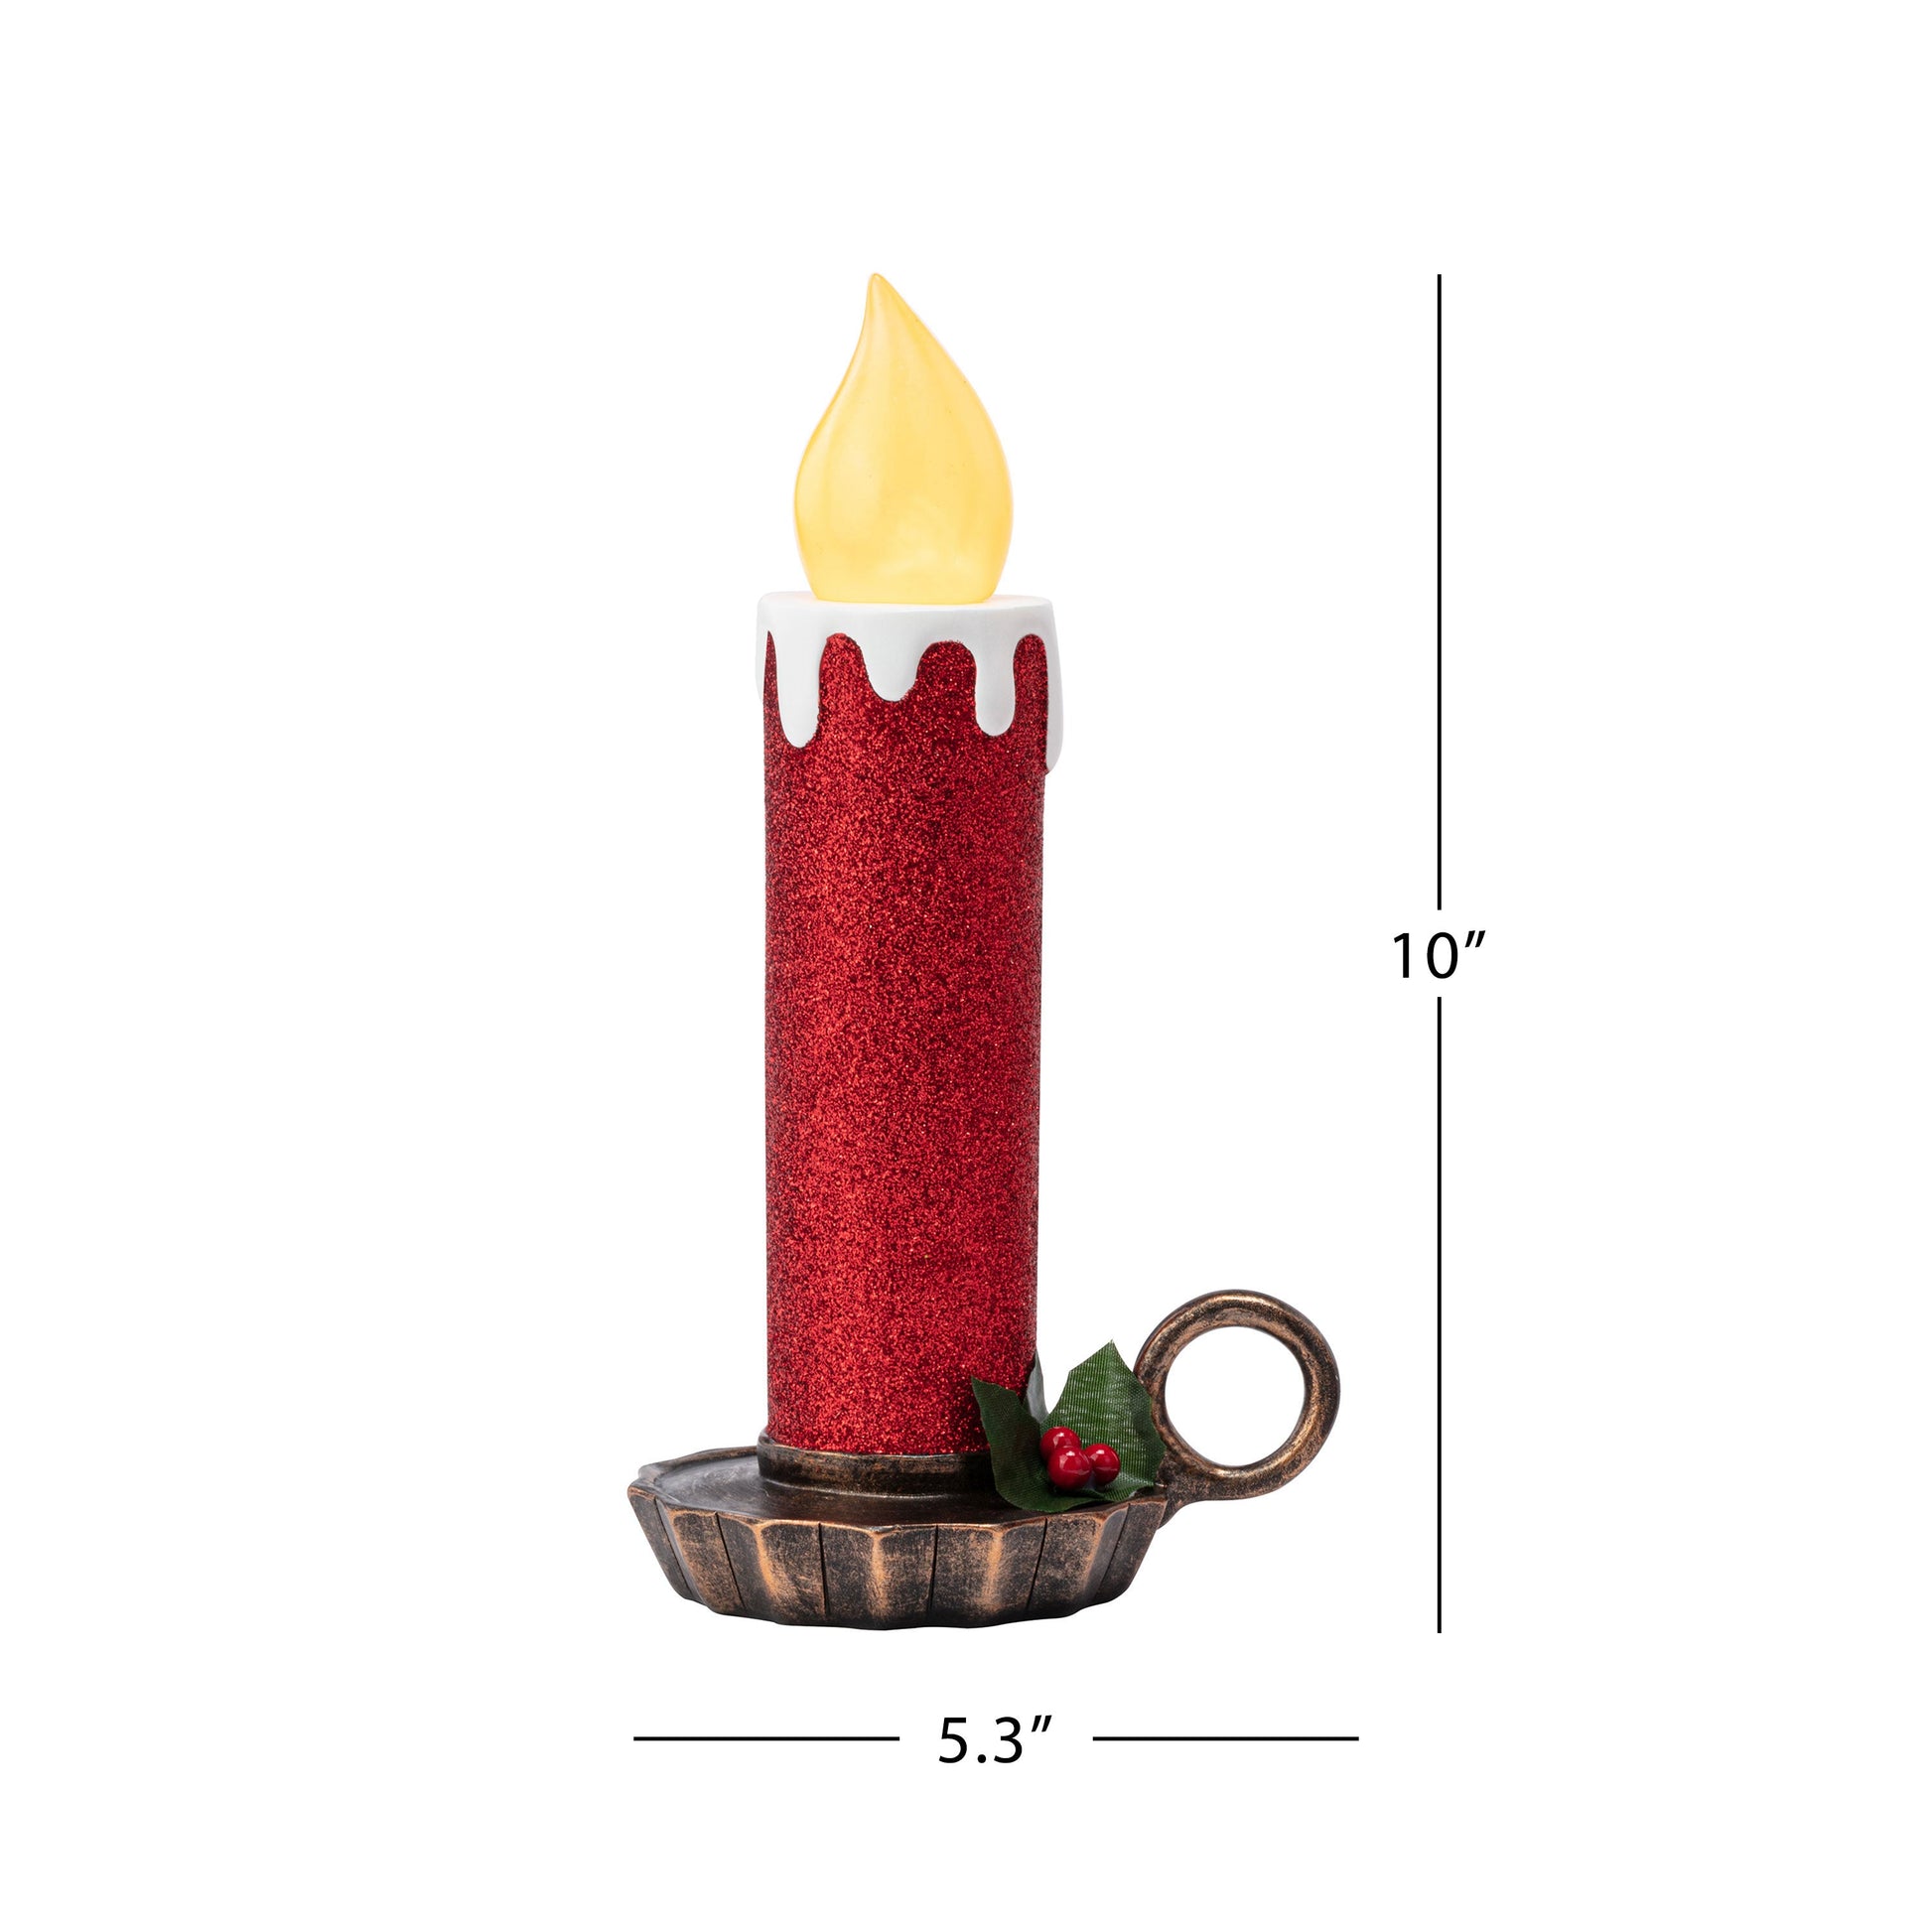 10" Set of 2 Flickering LED Resin Glittery Candles - Red - Mr. Christmas